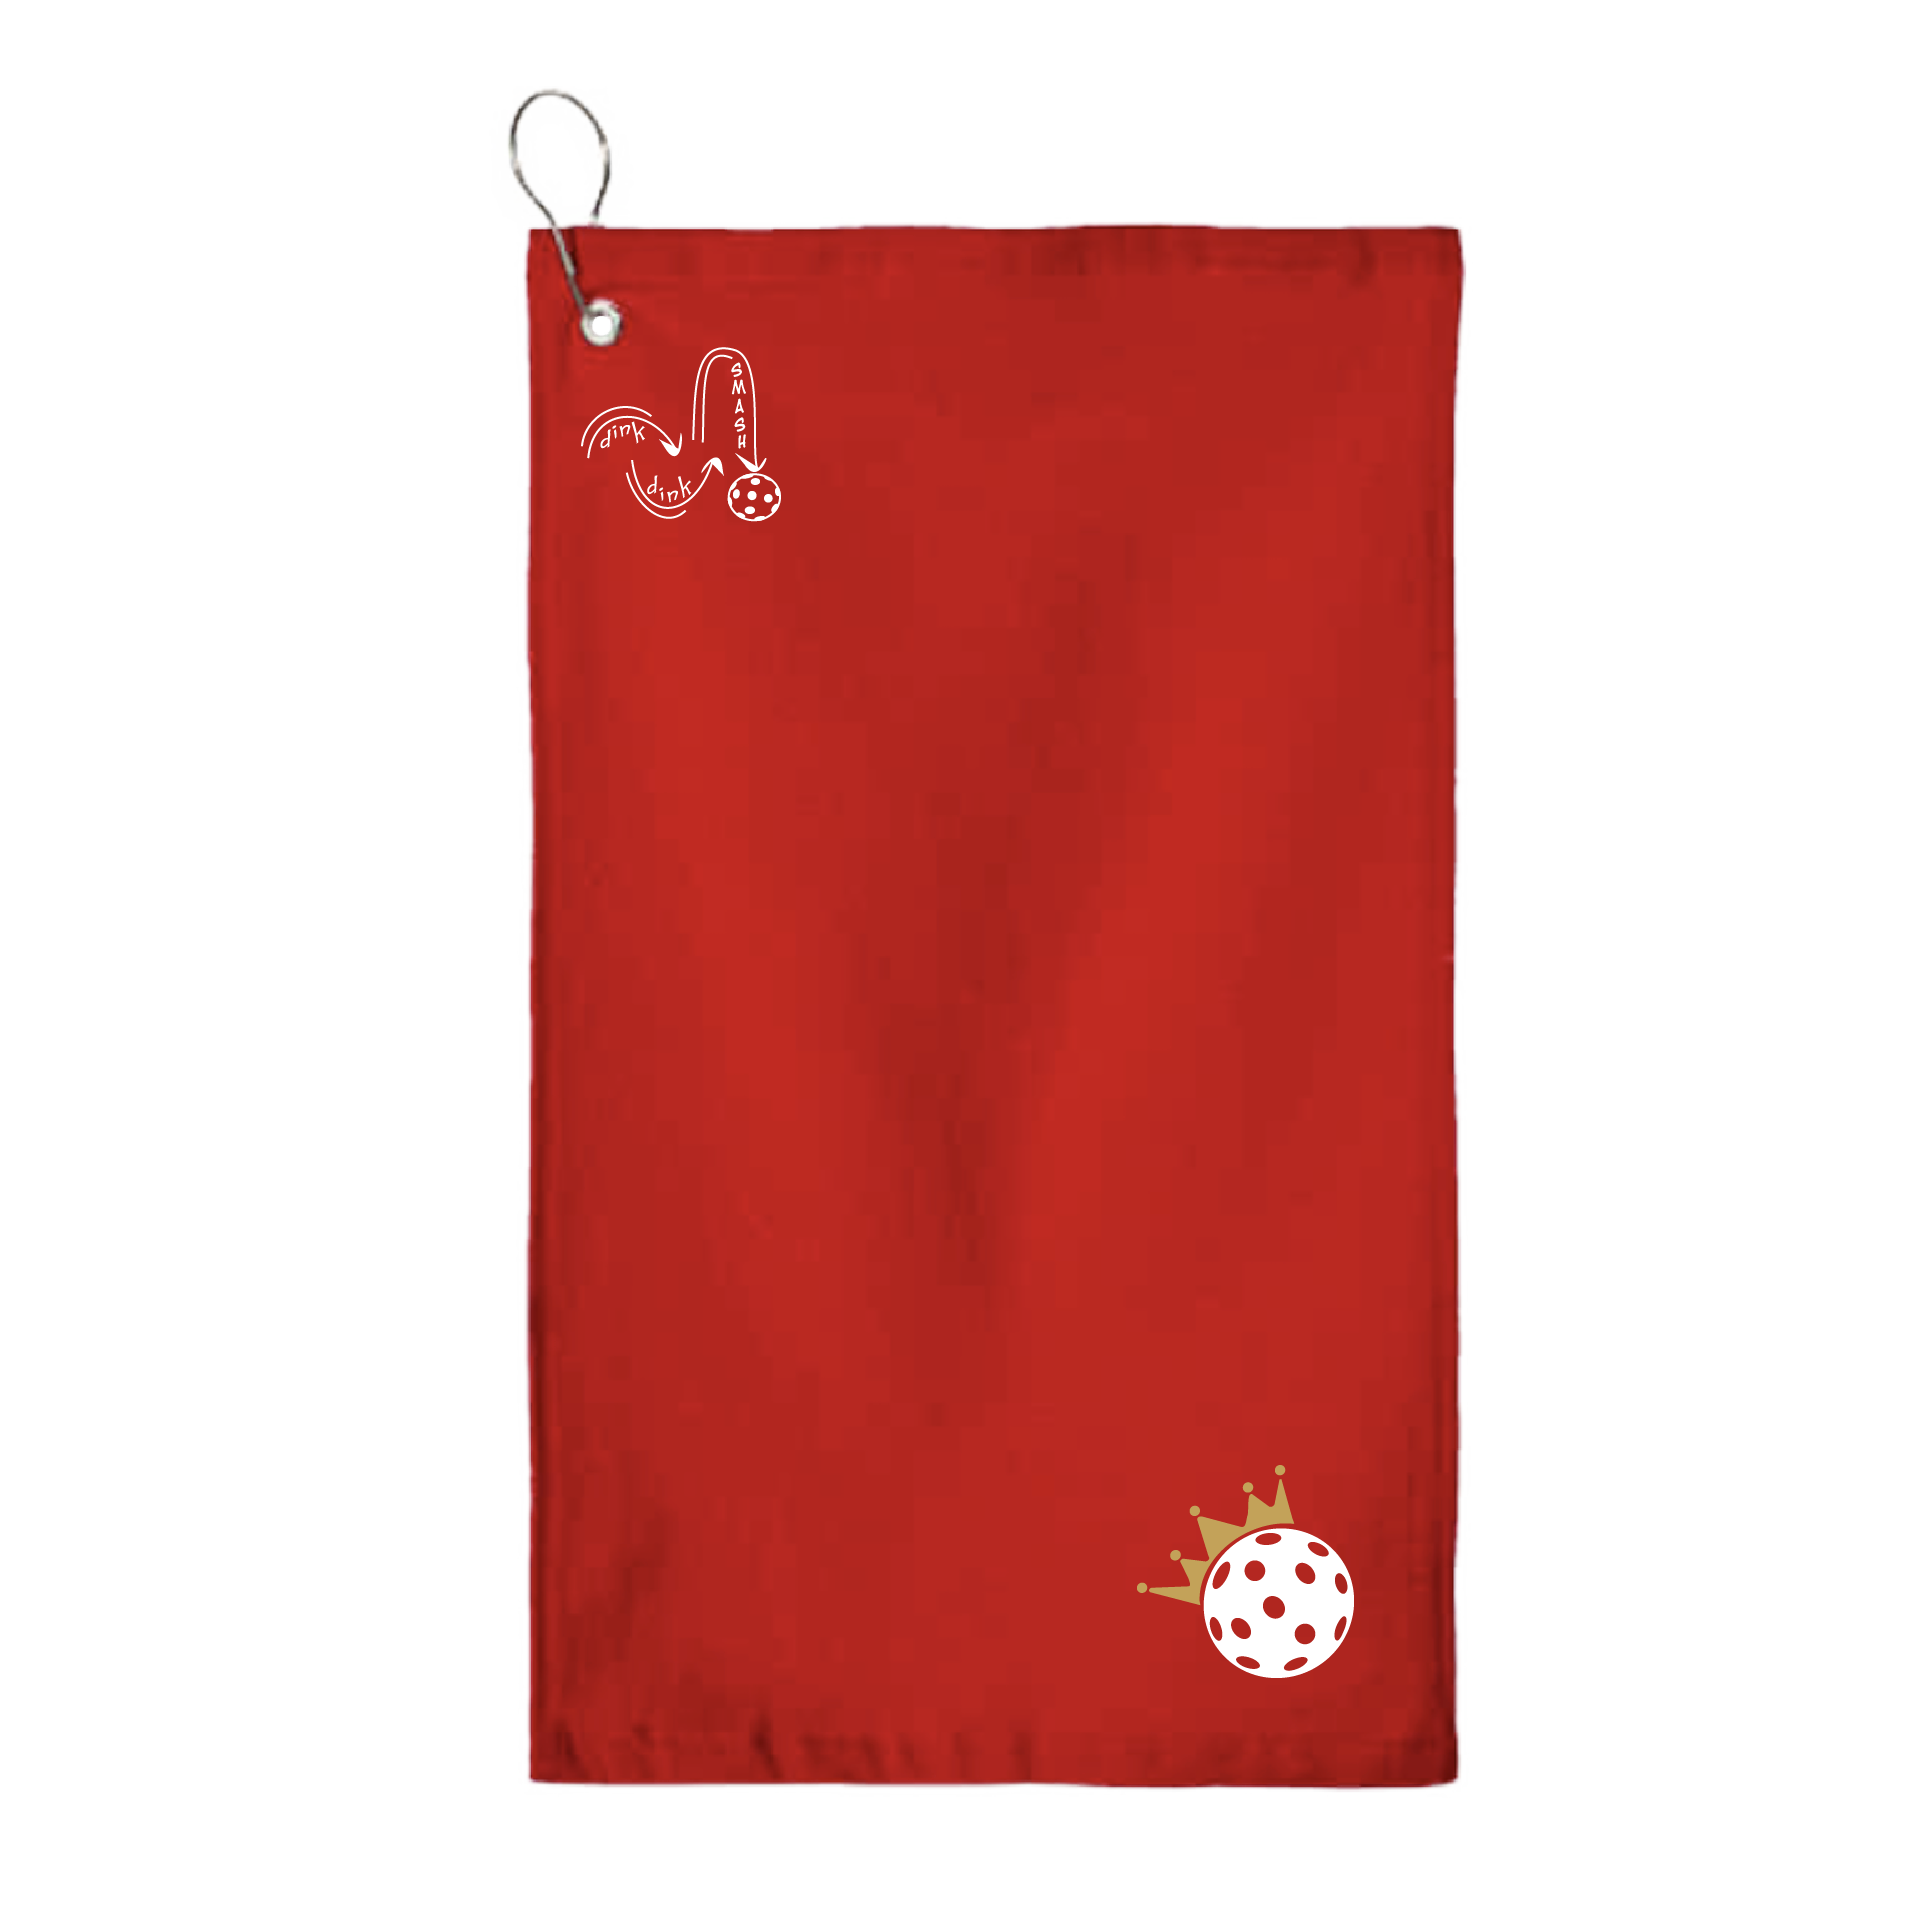 This Pickleball with Queen Crown towel is crafted with cotton terry velour for optimal performance. It features grommets, hooks, and hemmed edges for added durability. It's perfect for completing your pickleball gear, and an ideal gift for friends and tournaments. The towel is designed to be both absorbent and lightweight, so you can remain dry and comfortable while you play.